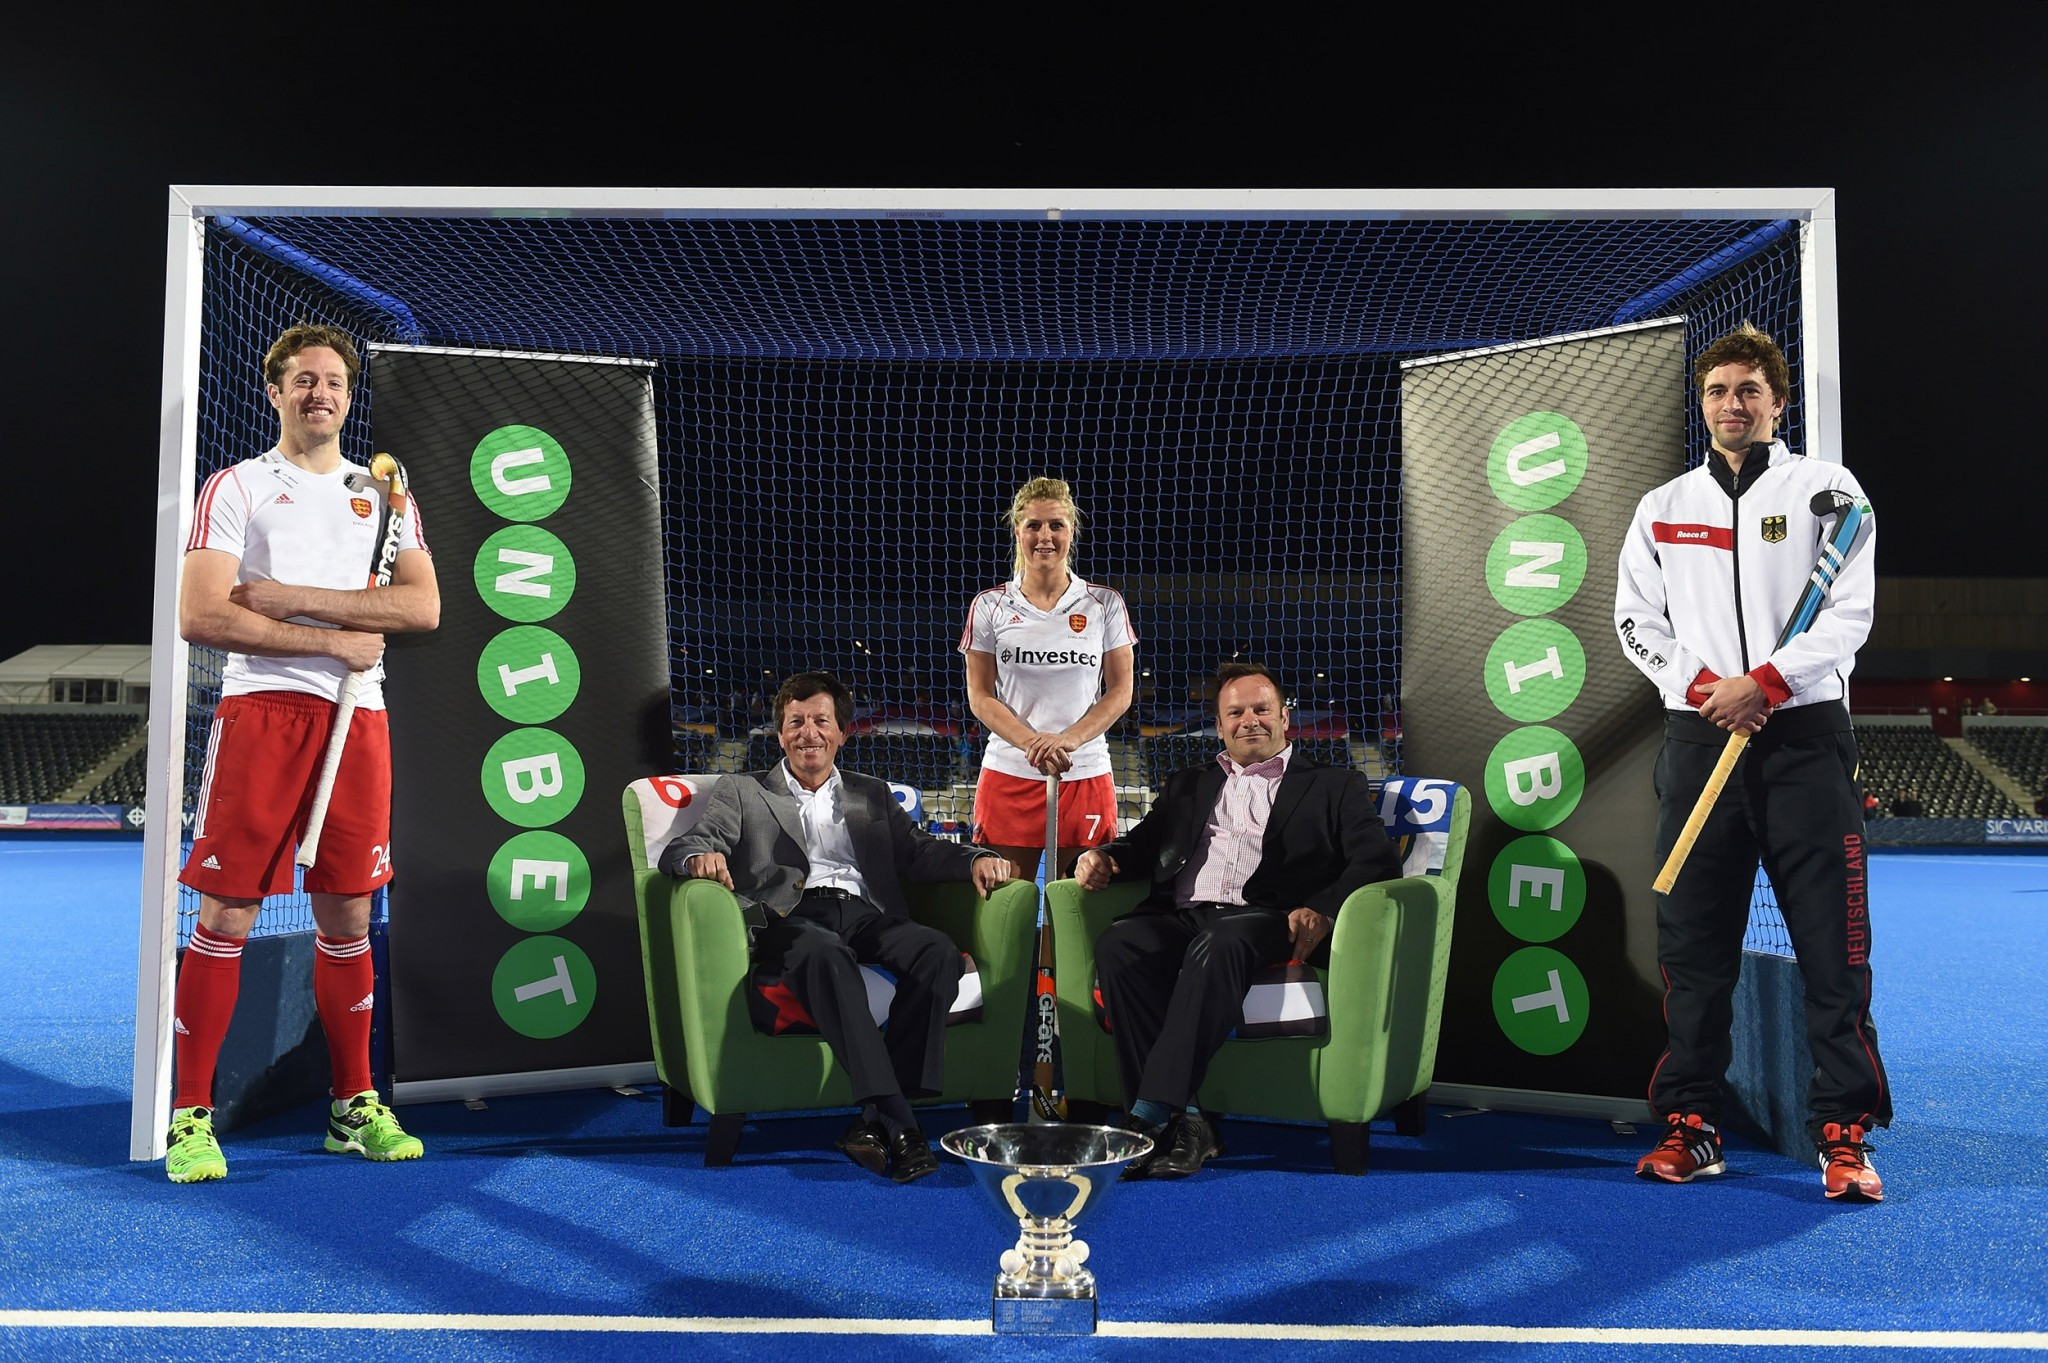 Online gambling company Unibet have been announced as title sponsors of the 2015 EuroHockey Championships ©England Hockey